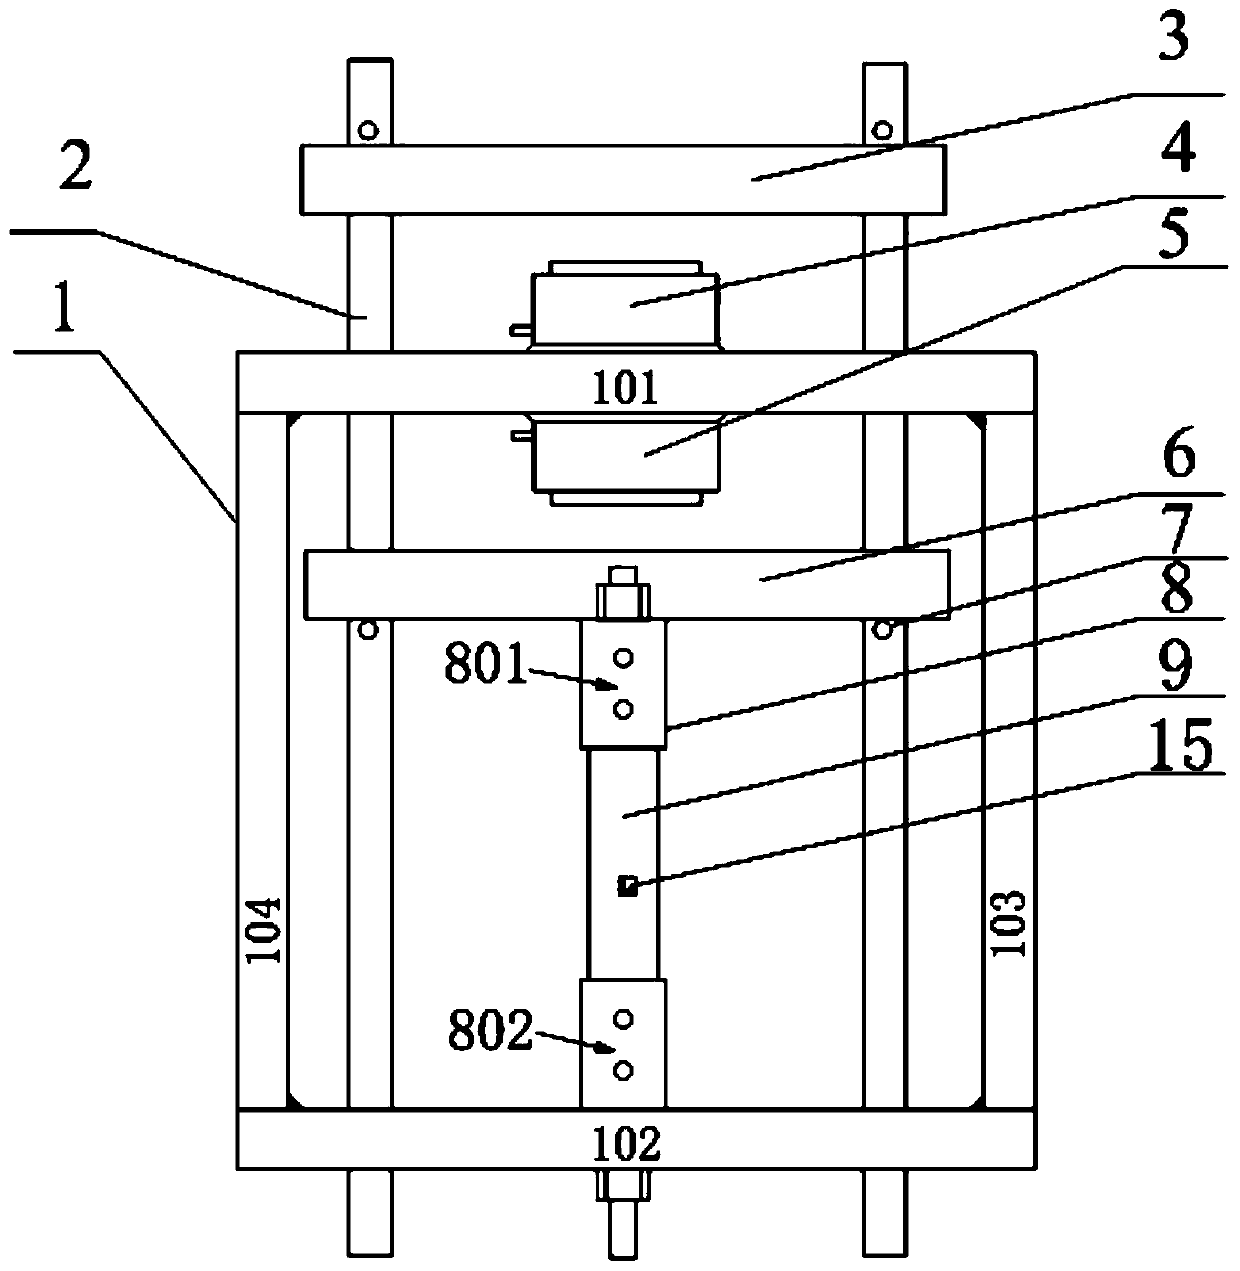 A device for calibration of tension and compression residual stress